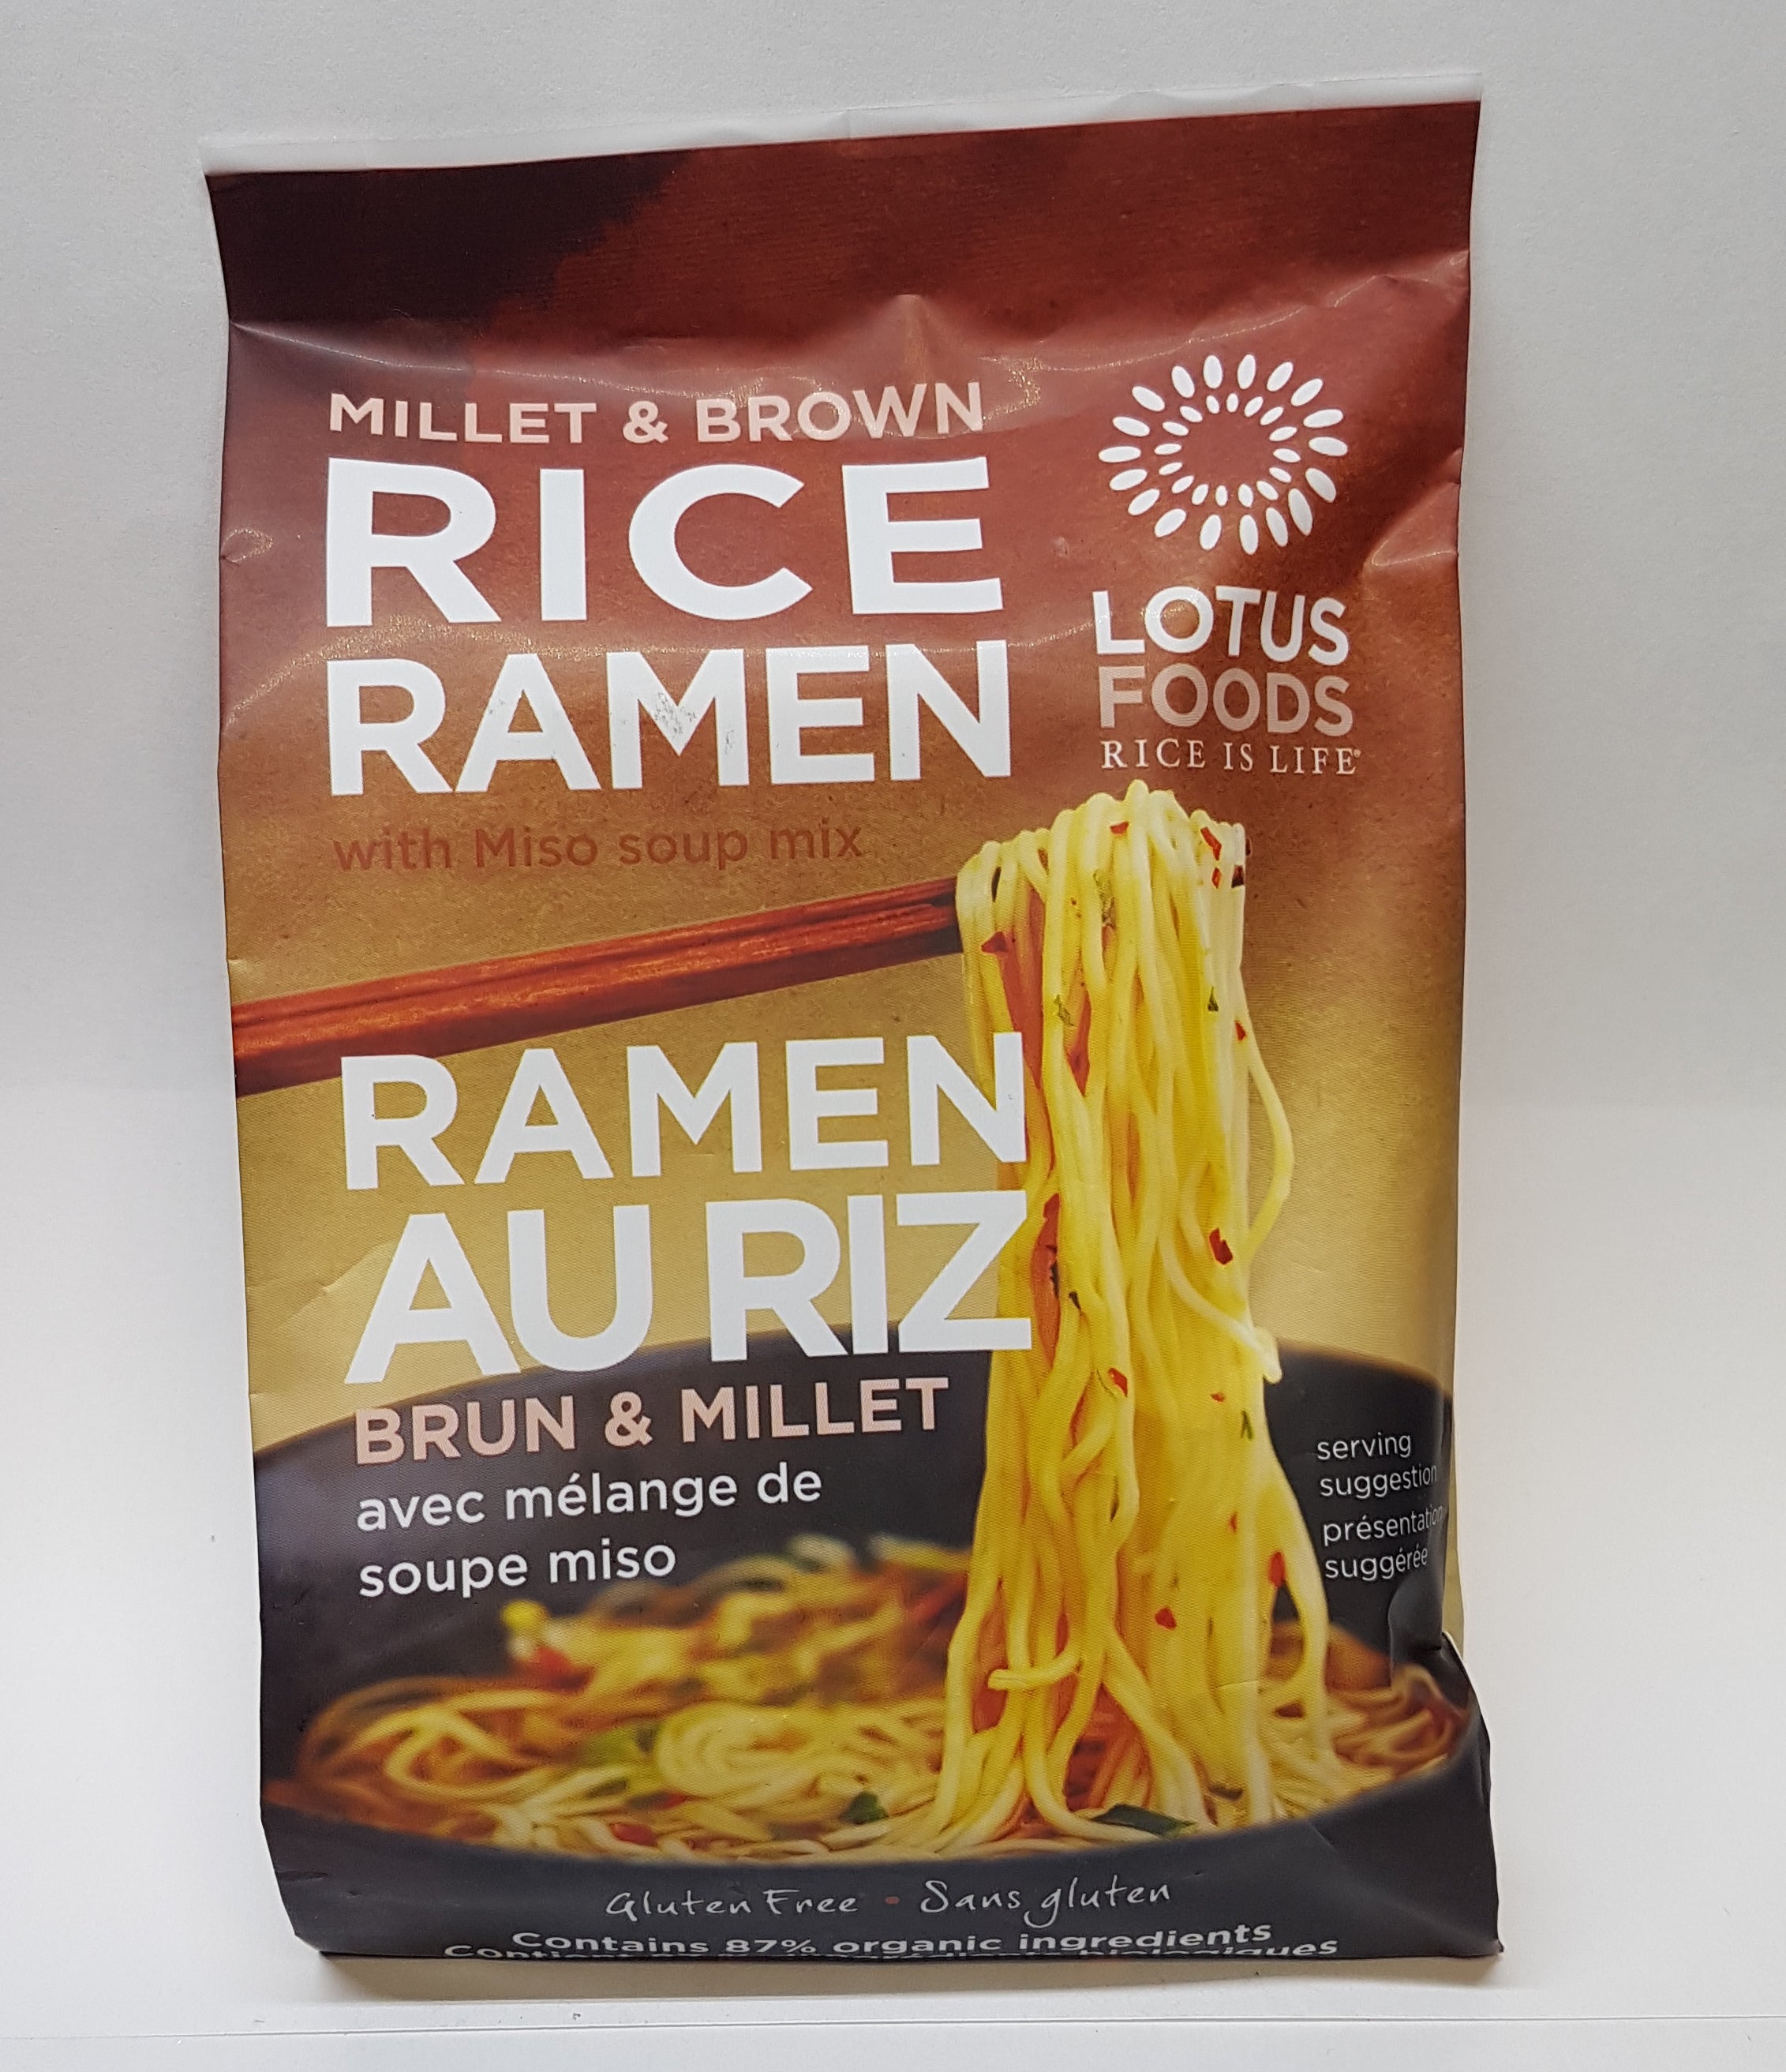 Lotus Foods Millet & Brown Rice Ramen with Miso Soup (80g) - Lifestyle Markets